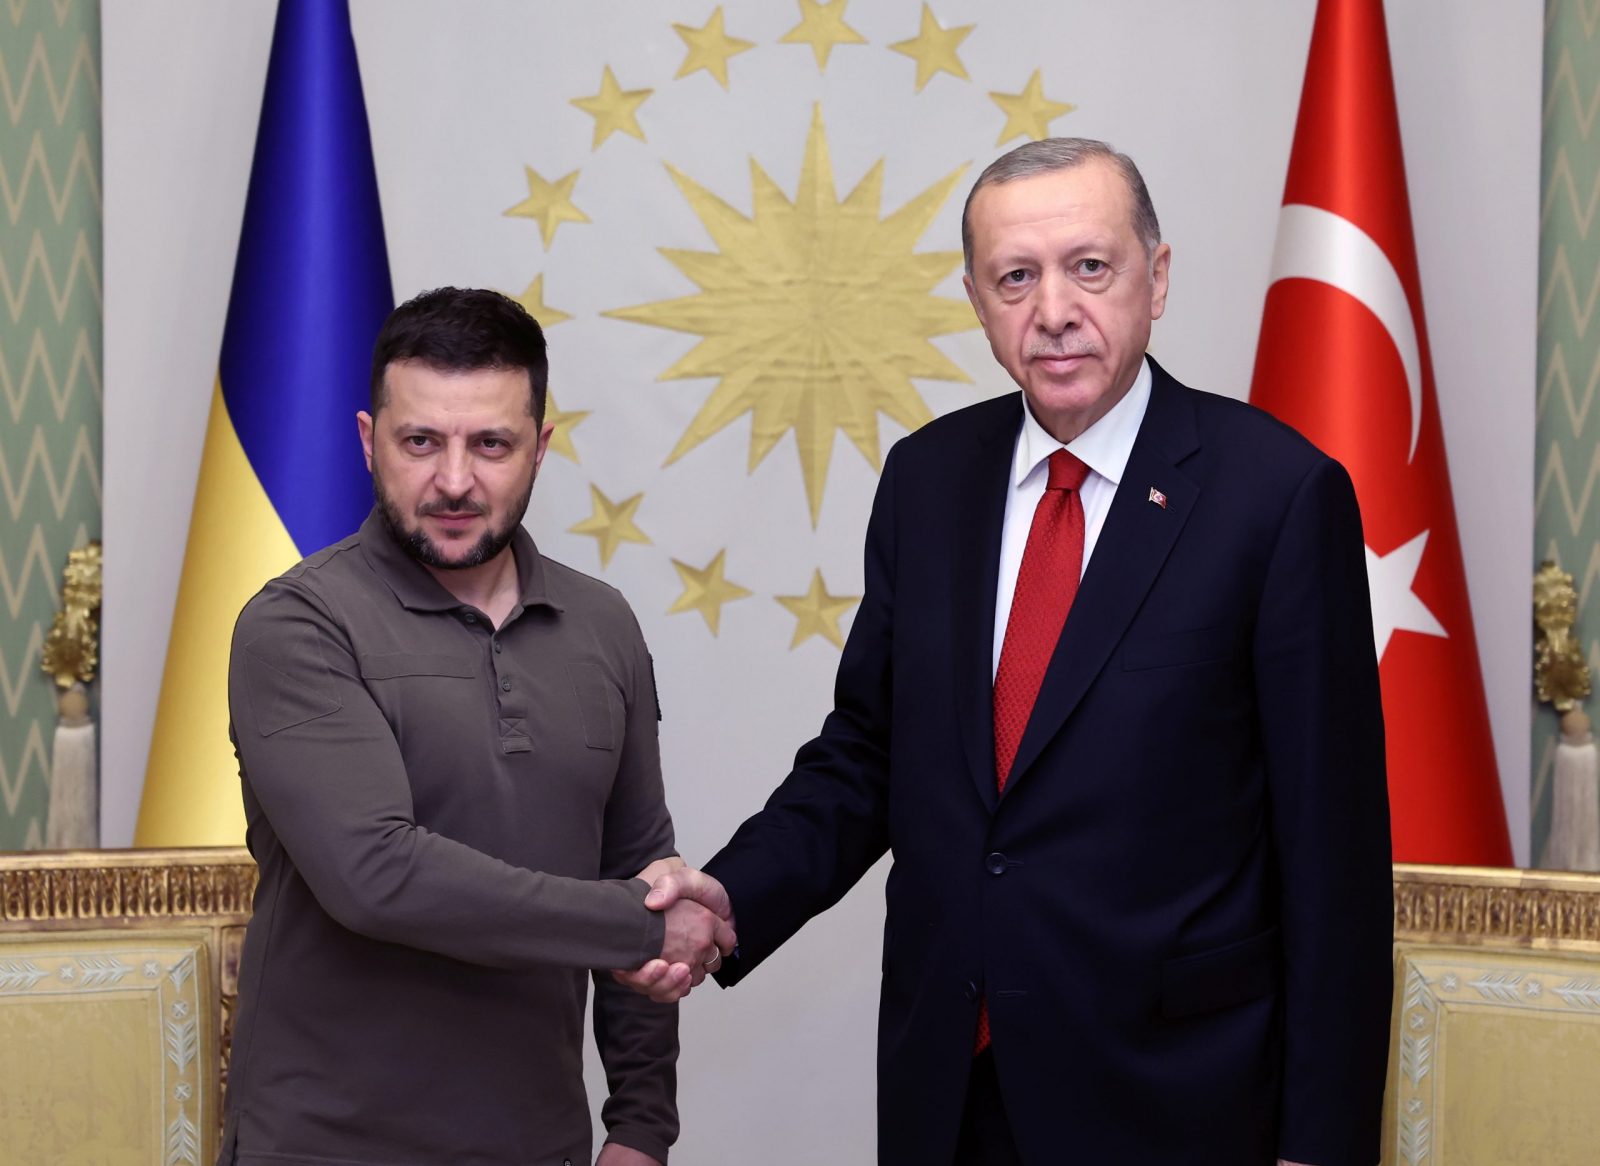 epa10733009 A handout photo made available by the Turkish Presidential press office shows Turkey's President Recep Tayyip Erdogan (R) and Ukraine's President Volodymyr Zelensky (L) posing before their meeting in Istanbul, Turkey, 07 July 2023.  EPA/MURAT CETIN MUHURDAR / HANDOUT  HANDOUT EDITORIAL USE ONLY/NO SALES